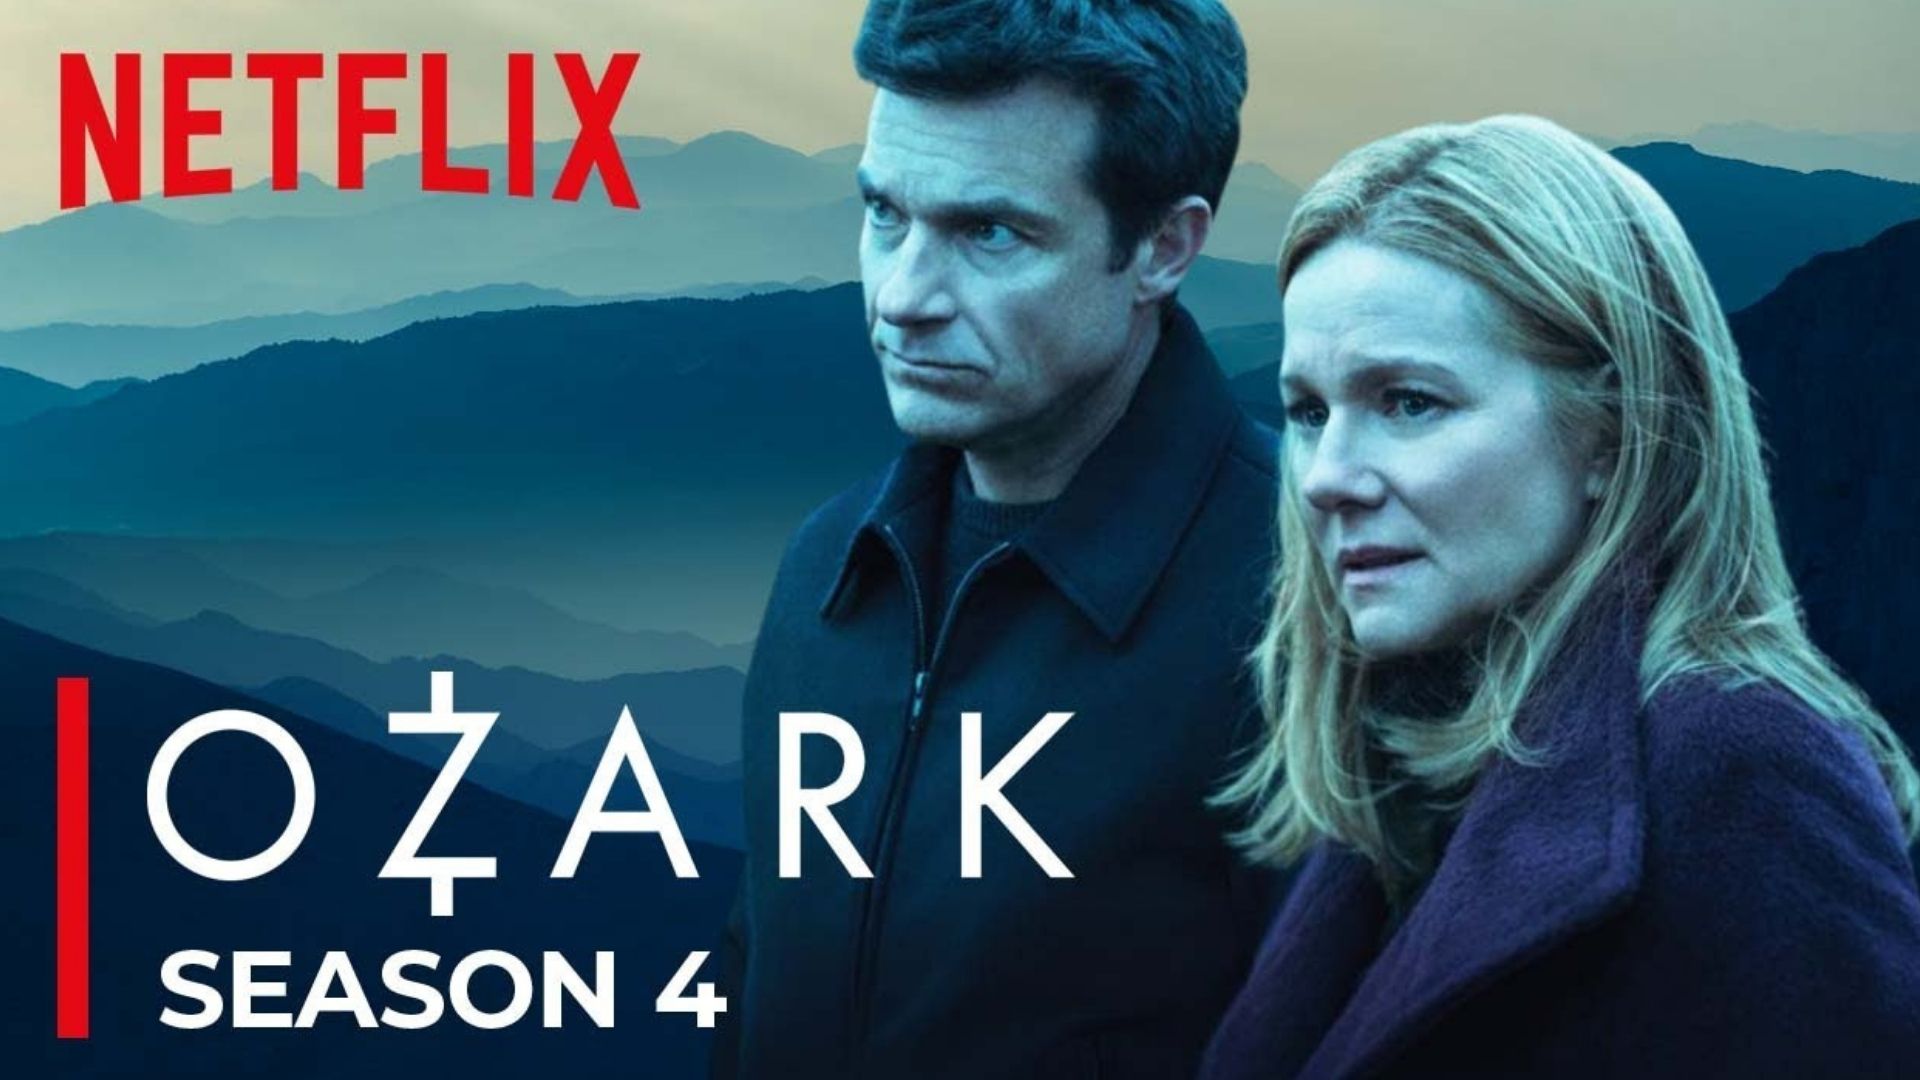 Ozark Season 4 Release Date Cast and other details.